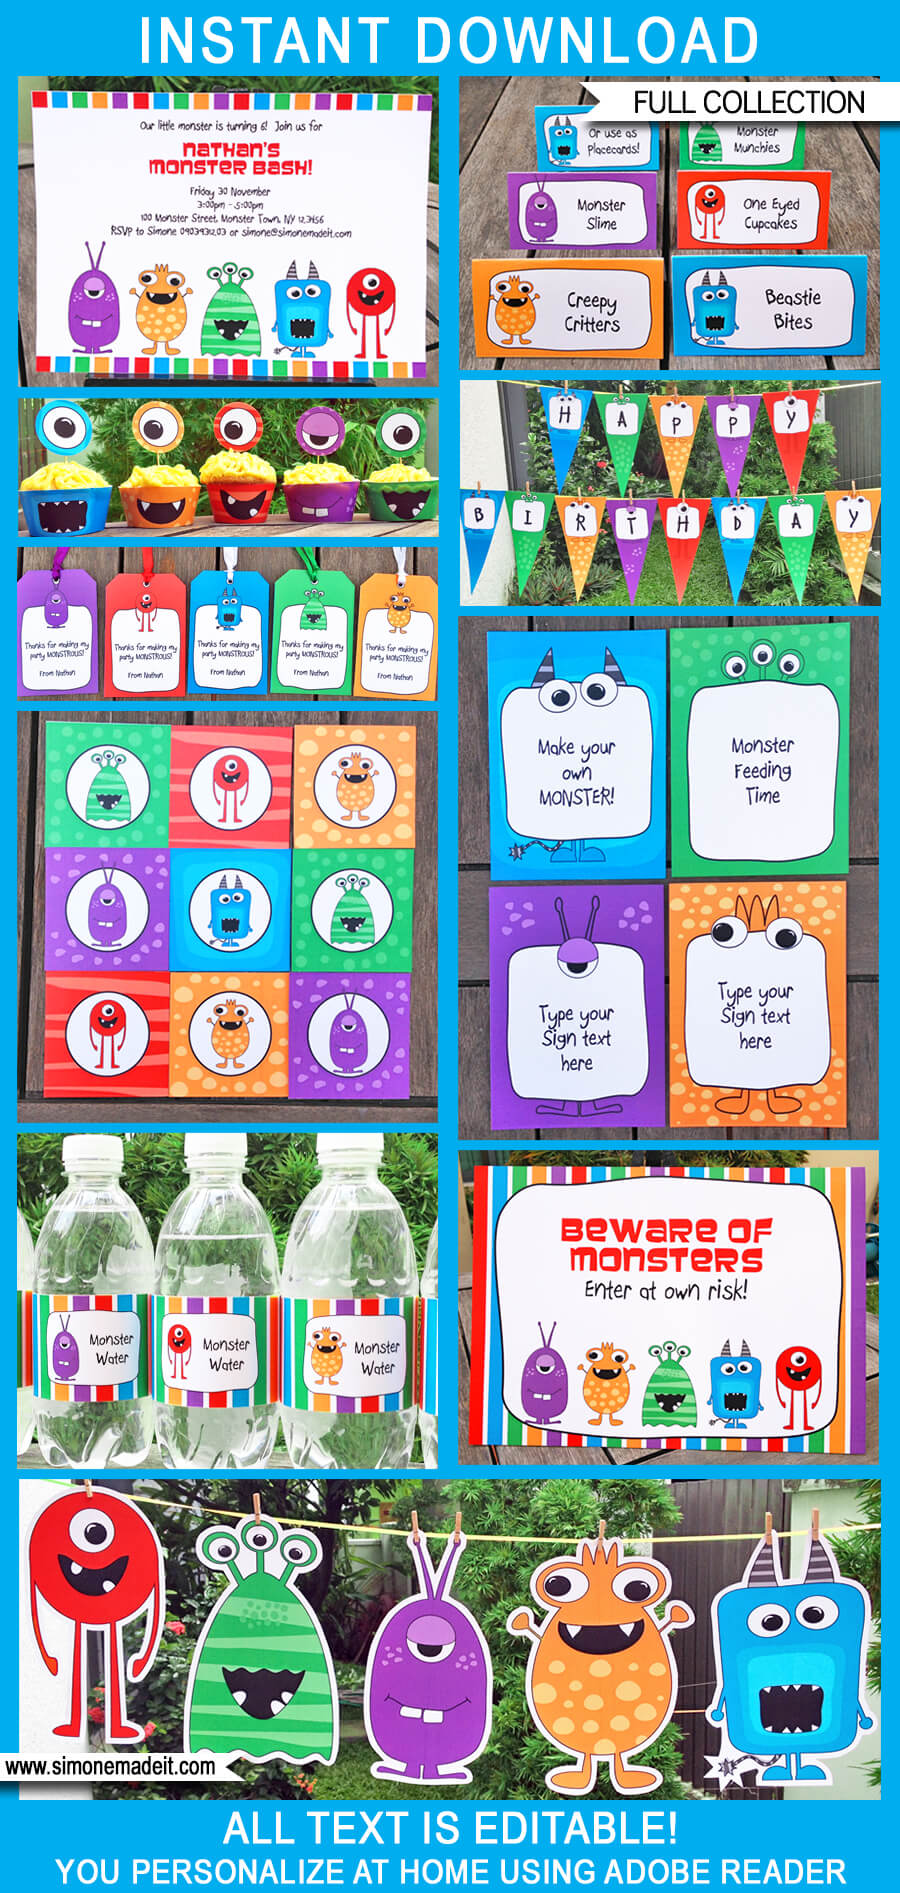 Monster Party Printables, Invitations & Decorations | Editable Birthday Party Theme Templates | INSTANT DOWNLOAD $12.50 via SIMONEmadeit.com